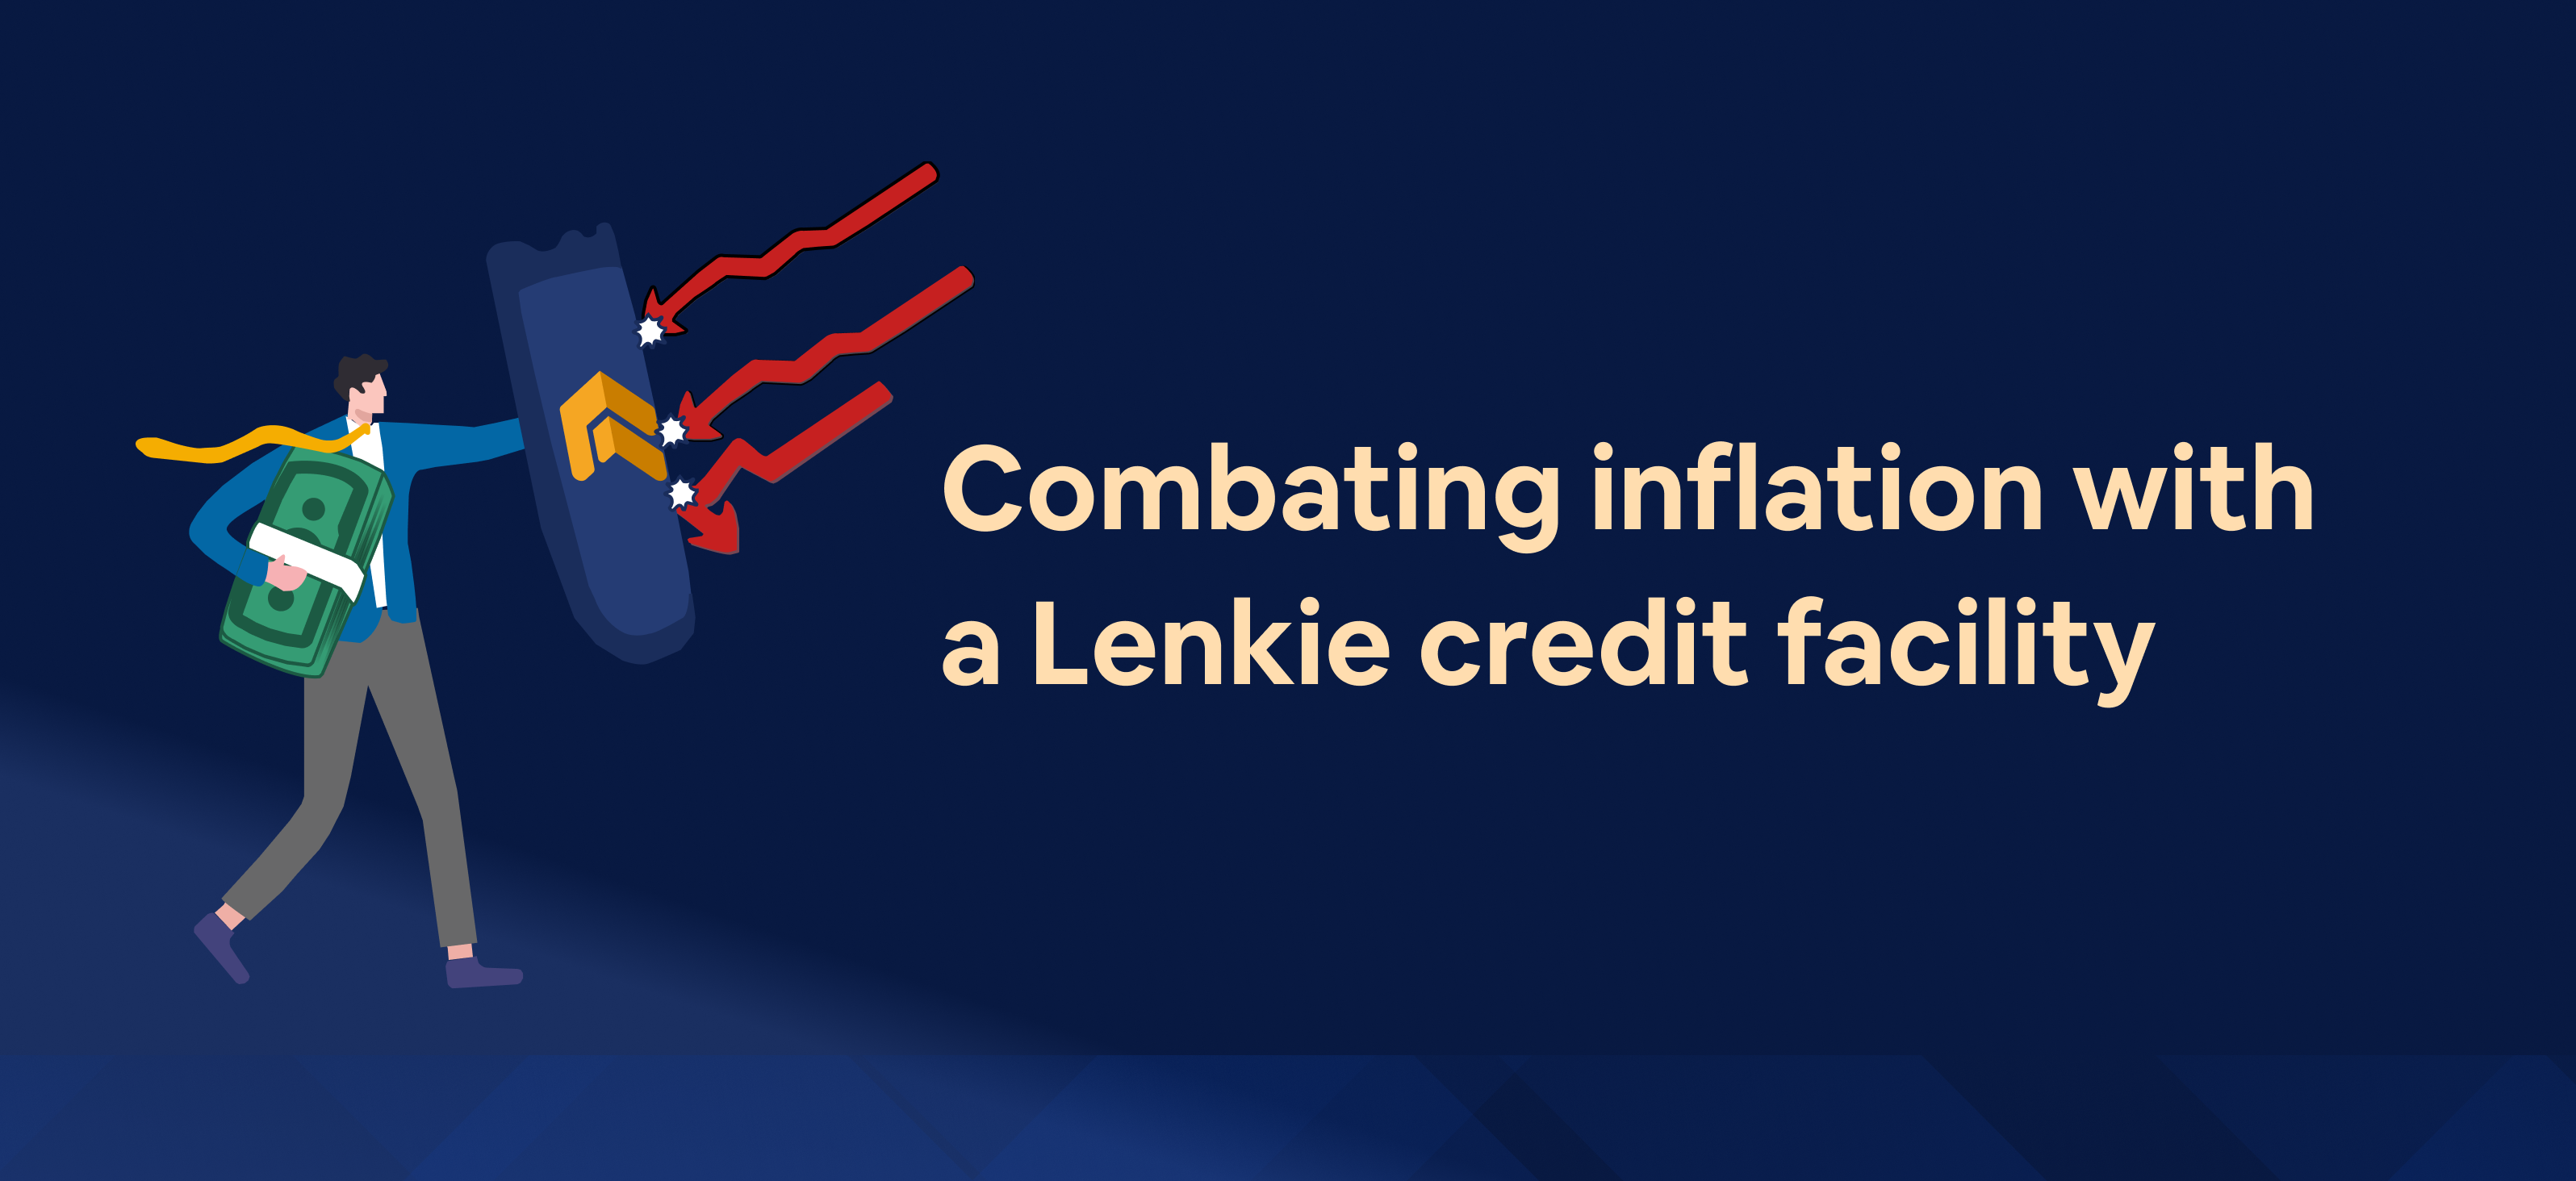 Combating inflation with a Lenkie credit facility 